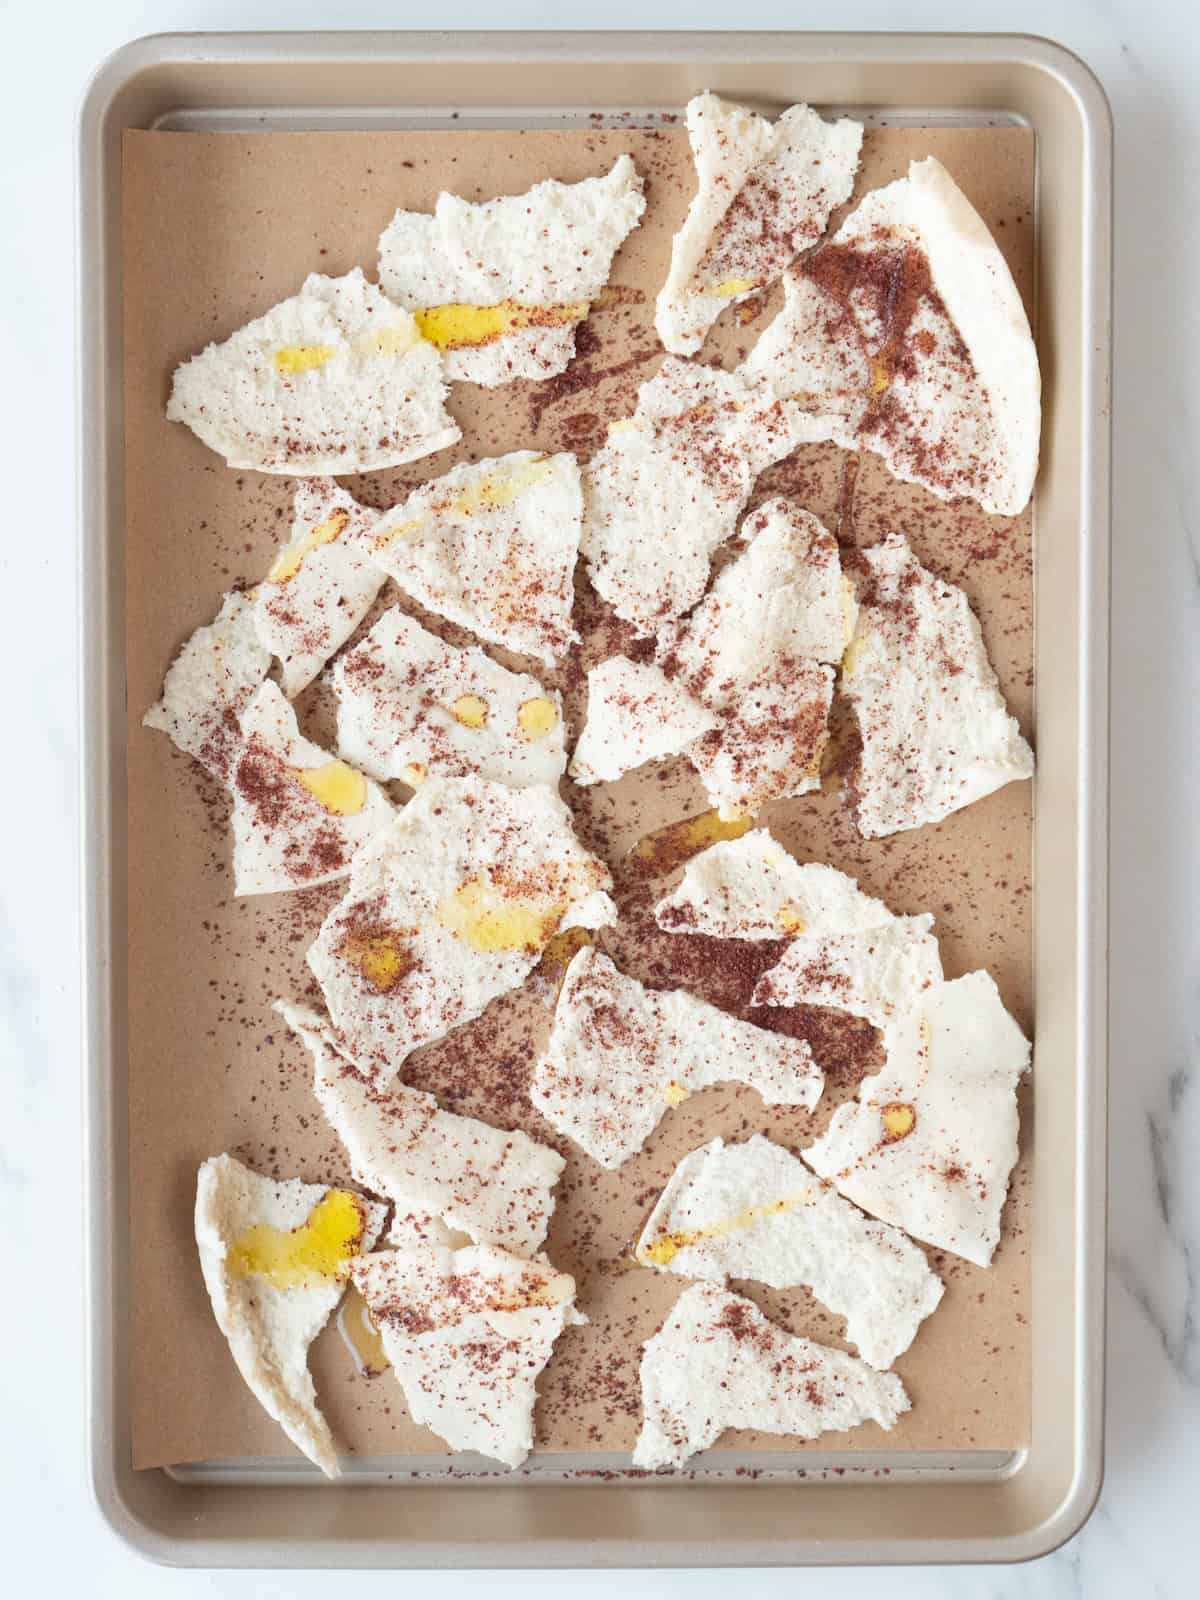 A parchment paper lined baking sheet with pita torn into pieces, drizzled with olive oil and sprinkled with sumac.